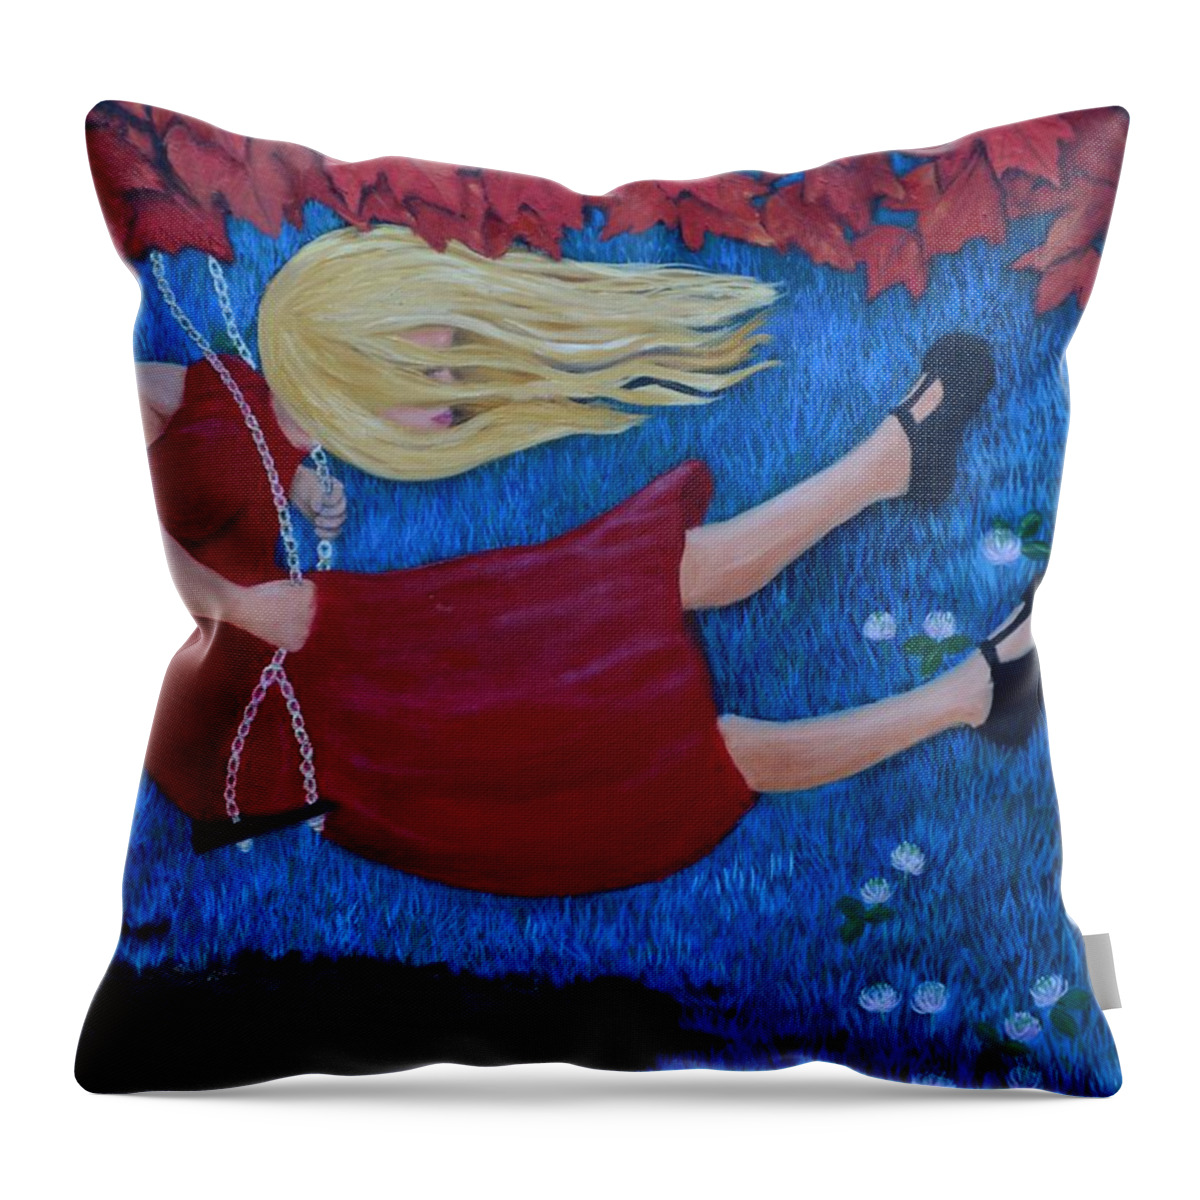 Swing Throw Pillow featuring the painting Melissa by Leandria Goodman